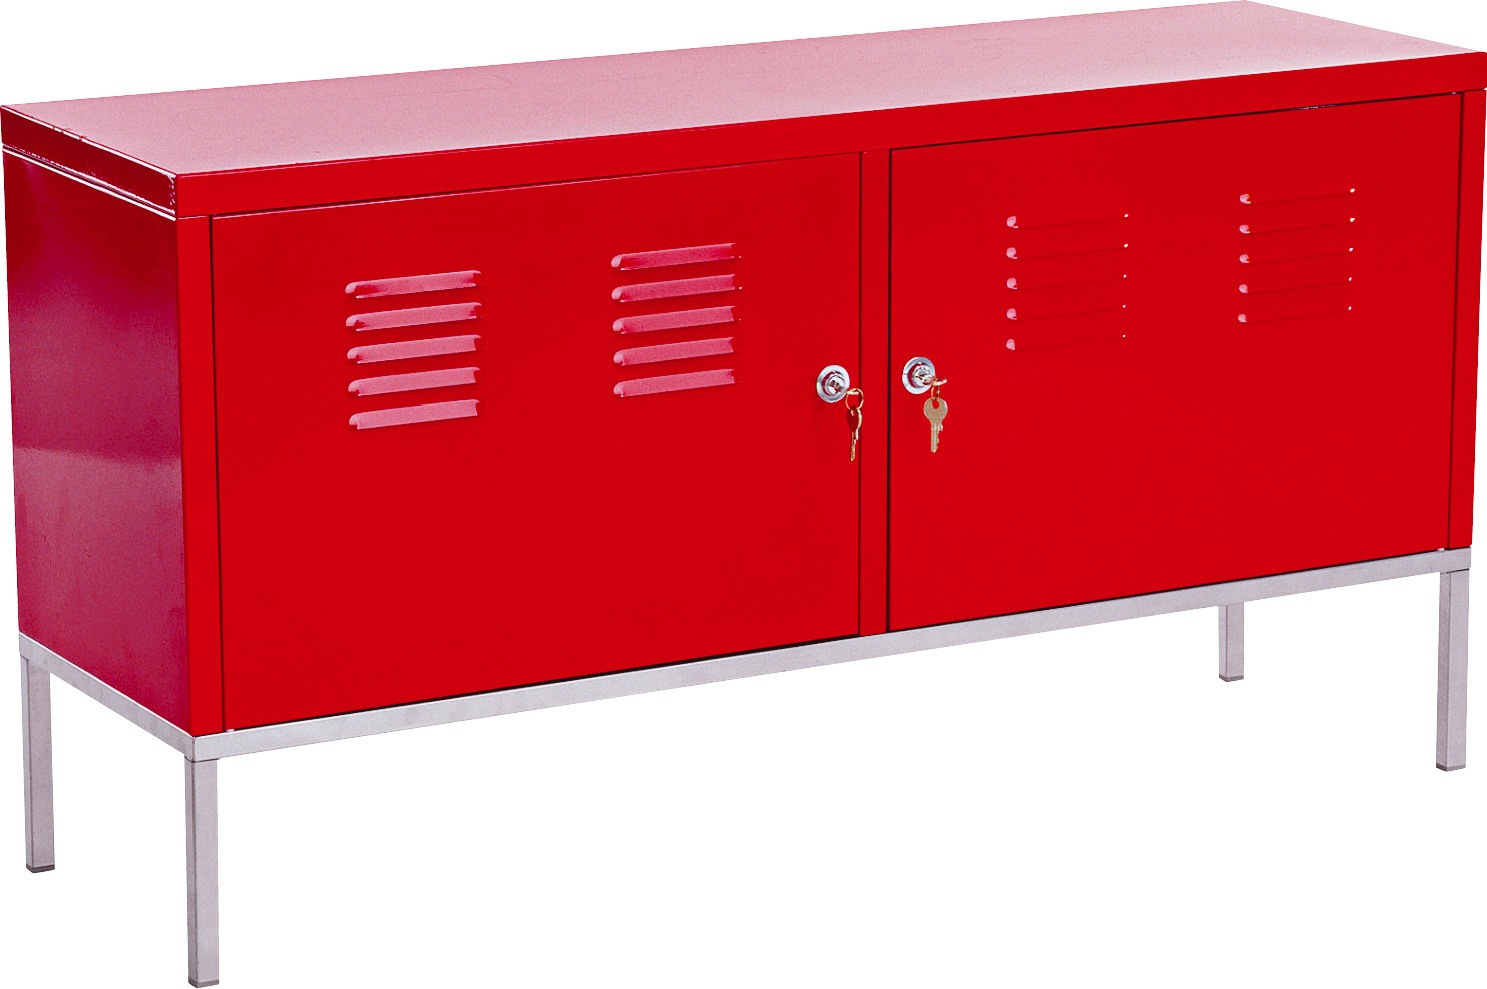 Low two-door red metal cabinet on stainless steel base.